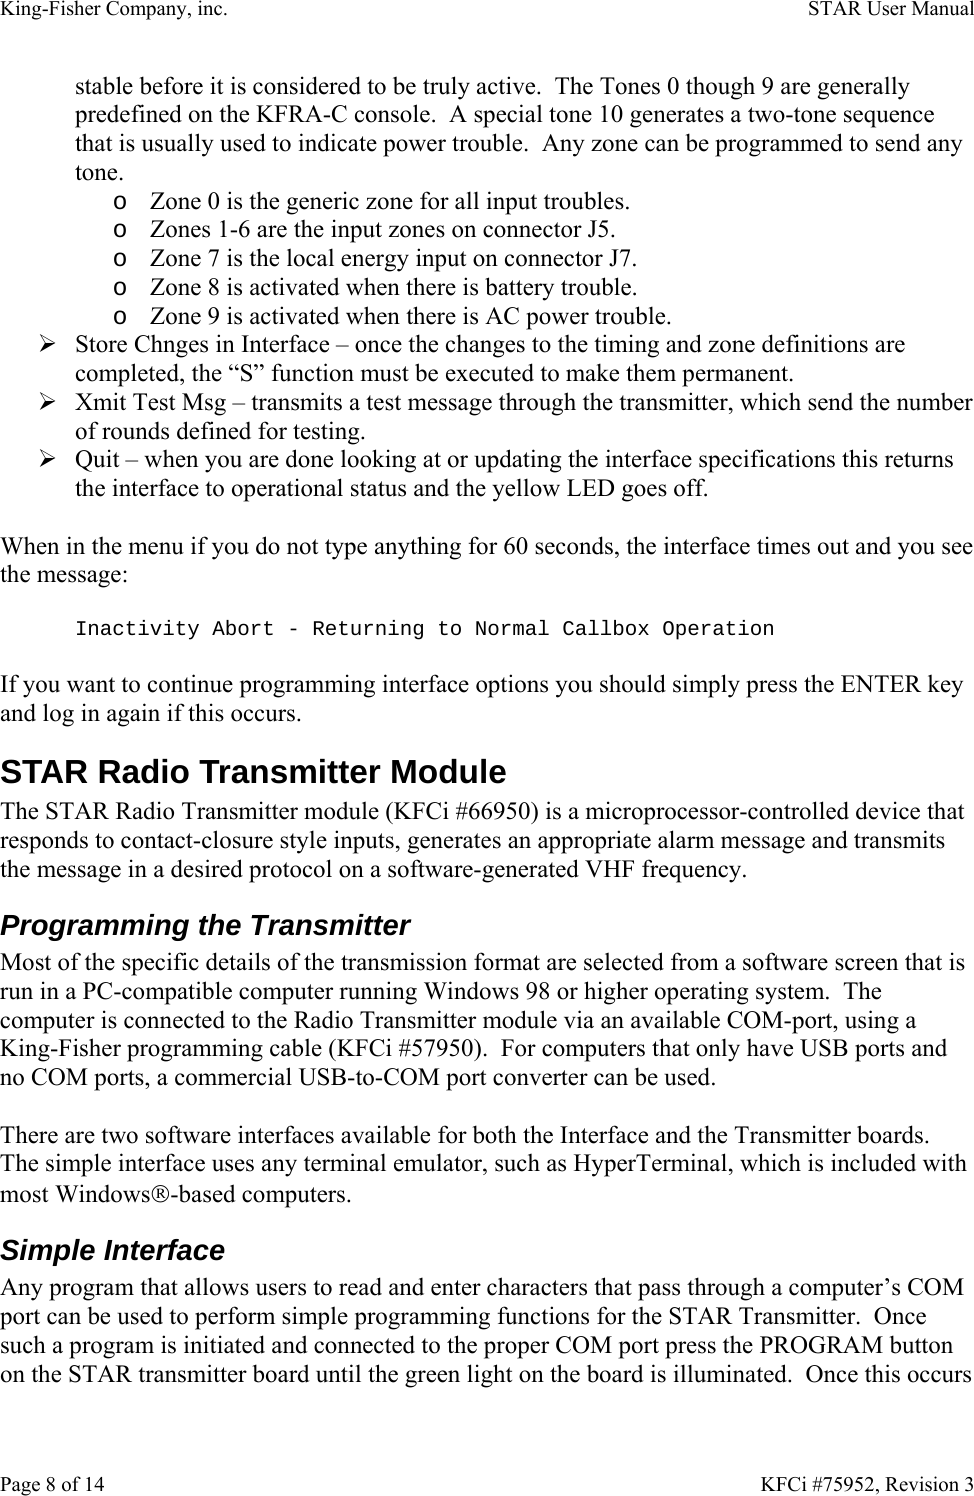 King-Fisher Company, inc.    STAR User Manual Page 8 of 14    KFCi #75952, Revision 3 stable before it is considered to be truly active.  The Tones 0 though 9 are generally predefined on the KFRA-C console.  A special tone 10 generates a two-tone sequence that is usually used to indicate power trouble.  Any zone can be programmed to send any tone. o Zone 0 is the generic zone for all input troubles. o Zones 1-6 are the input zones on connector J5. o Zone 7 is the local energy input on connector J7. o Zone 8 is activated when there is battery trouble. o Zone 9 is activated when there is AC power trouble. ¾ Store Chnges in Interface – once the changes to the timing and zone definitions are completed, the “S” function must be executed to make them permanent. ¾ Xmit Test Msg – transmits a test message through the transmitter, which send the number of rounds defined for testing. ¾ Quit – when you are done looking at or updating the interface specifications this returns the interface to operational status and the yellow LED goes off.  When in the menu if you do not type anything for 60 seconds, the interface times out and you see the message:  Inactivity Abort - Returning to Normal Callbox Operation  If you want to continue programming interface options you should simply press the ENTER key and log in again if this occurs. STAR Radio Transmitter Module The STAR Radio Transmitter module (KFCi #66950) is a microprocessor-controlled device that responds to contact-closure style inputs, generates an appropriate alarm message and transmits the message in a desired protocol on a software-generated VHF frequency. Programming the Transmitter Most of the specific details of the transmission format are selected from a software screen that is run in a PC-compatible computer running Windows 98 or higher operating system.  The computer is connected to the Radio Transmitter module via an available COM-port, using a King-Fisher programming cable (KFCi #57950).  For computers that only have USB ports and no COM ports, a commercial USB-to-COM port converter can be used.  There are two software interfaces available for both the Interface and the Transmitter boards.  The simple interface uses any terminal emulator, such as HyperTerminal, which is included with most Windows®-based computers. Simple Interface Any program that allows users to read and enter characters that pass through a computer’s COM port can be used to perform simple programming functions for the STAR Transmitter.  Once such a program is initiated and connected to the proper COM port press the PROGRAM button on the STAR transmitter board until the green light on the board is illuminated.  Once this occurs 